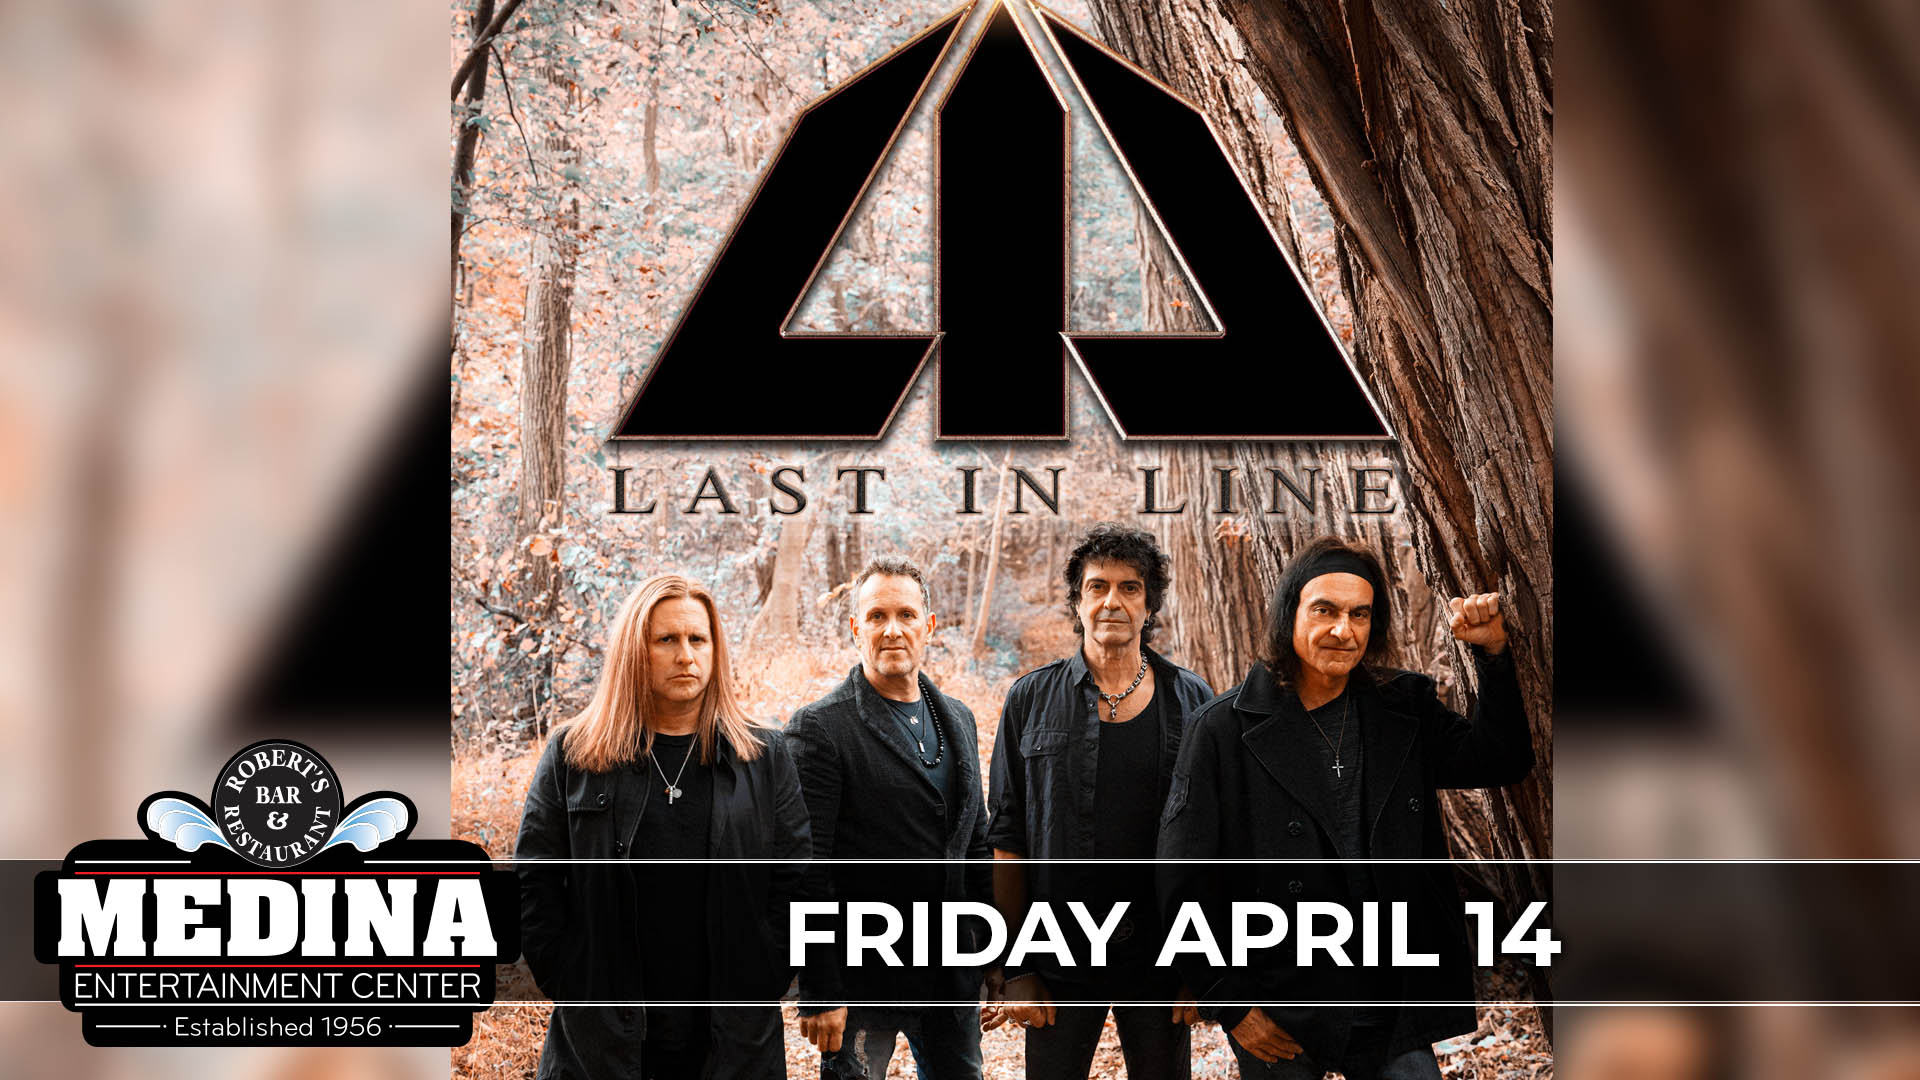 Last In Line with Guest Paralandra Medina Entertainment Center Friday, April 14, 2023 Doors: 7:00 PM | Music: 8:00 PM | 21+ Tickets on-sale Friday, March 3 at 11am Ticket Prices: $39.00 (Gold Seating), $34.00 (Silver Seating) & $28.00 (GA Seating) plus applicable fees